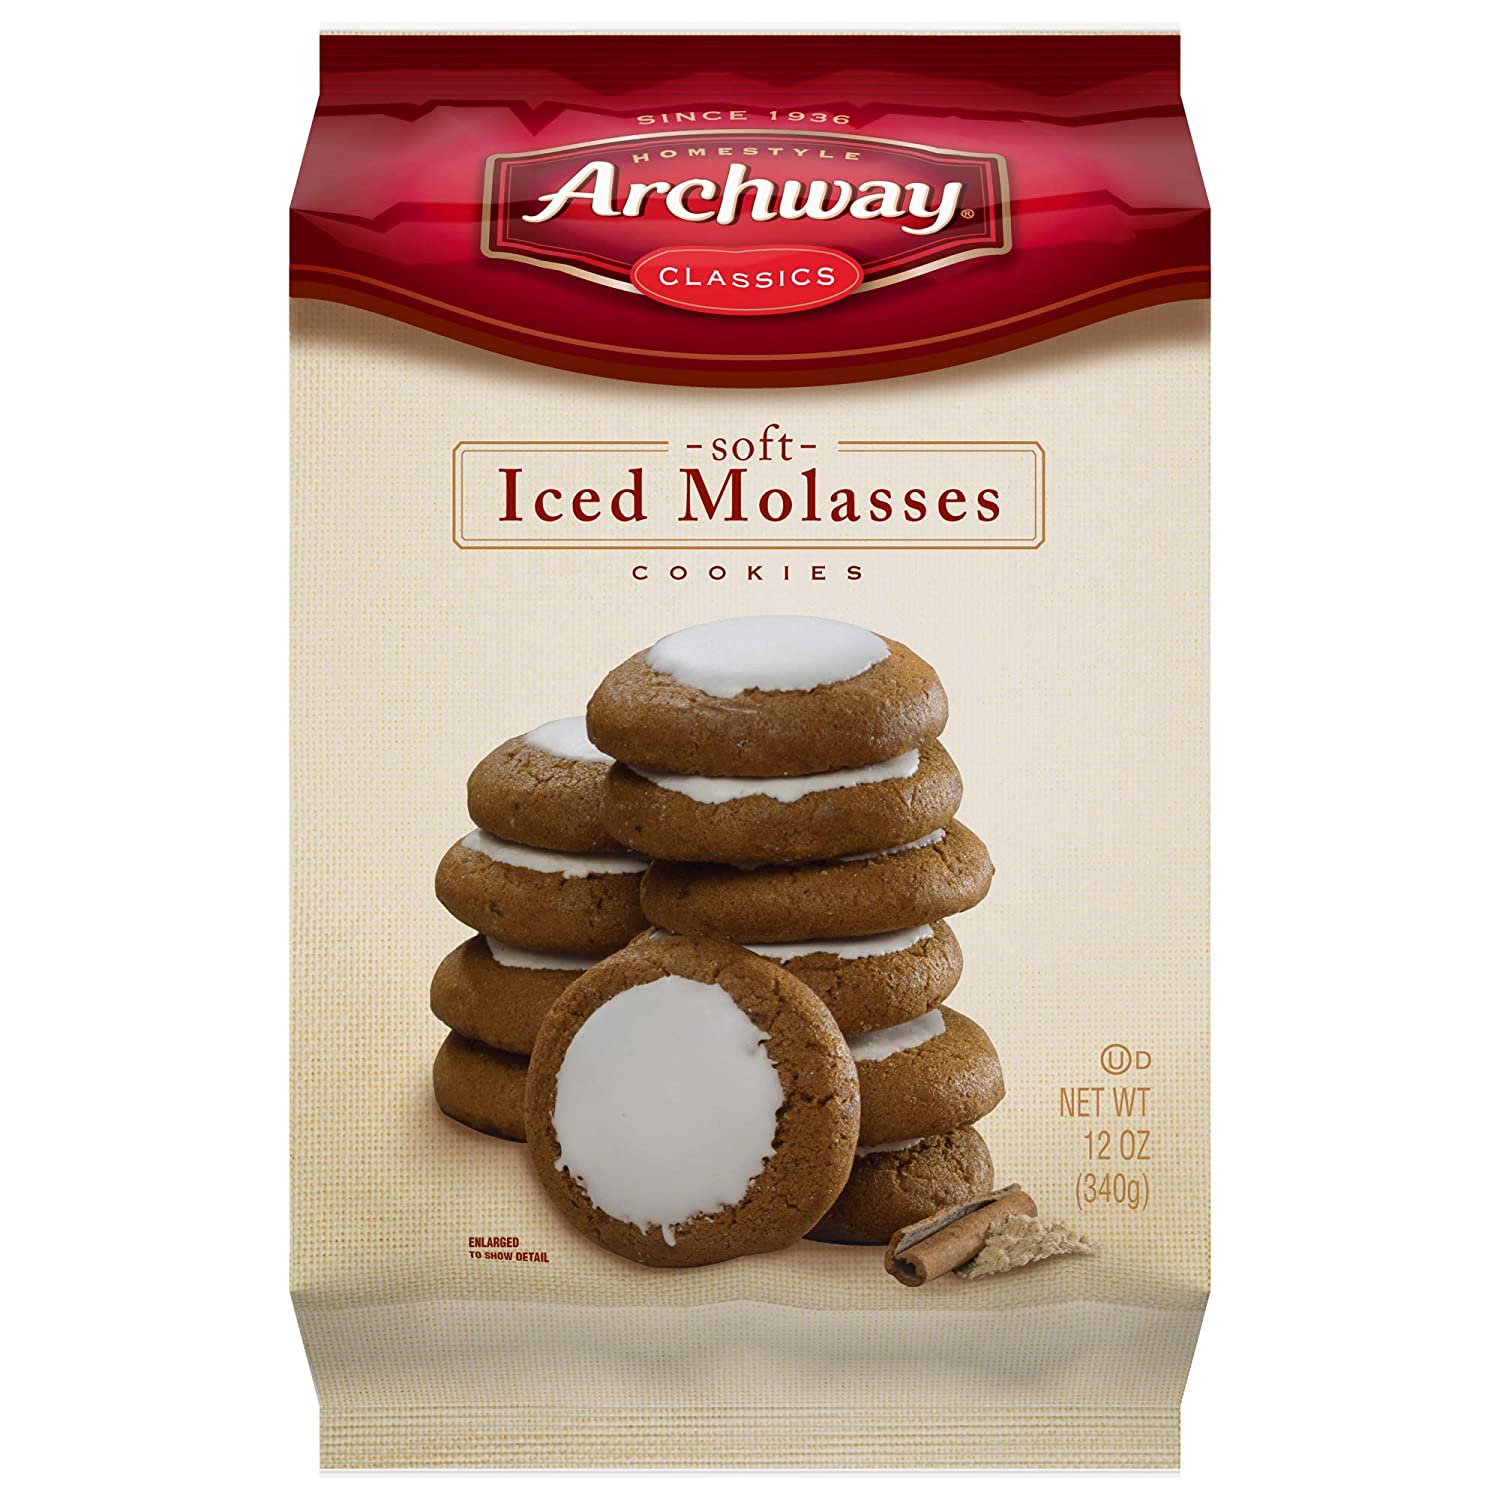 12-Oz Archway Classics Iced Molasses Cookies $2 w/ S&S + Free S&H w/ Prime or $25+